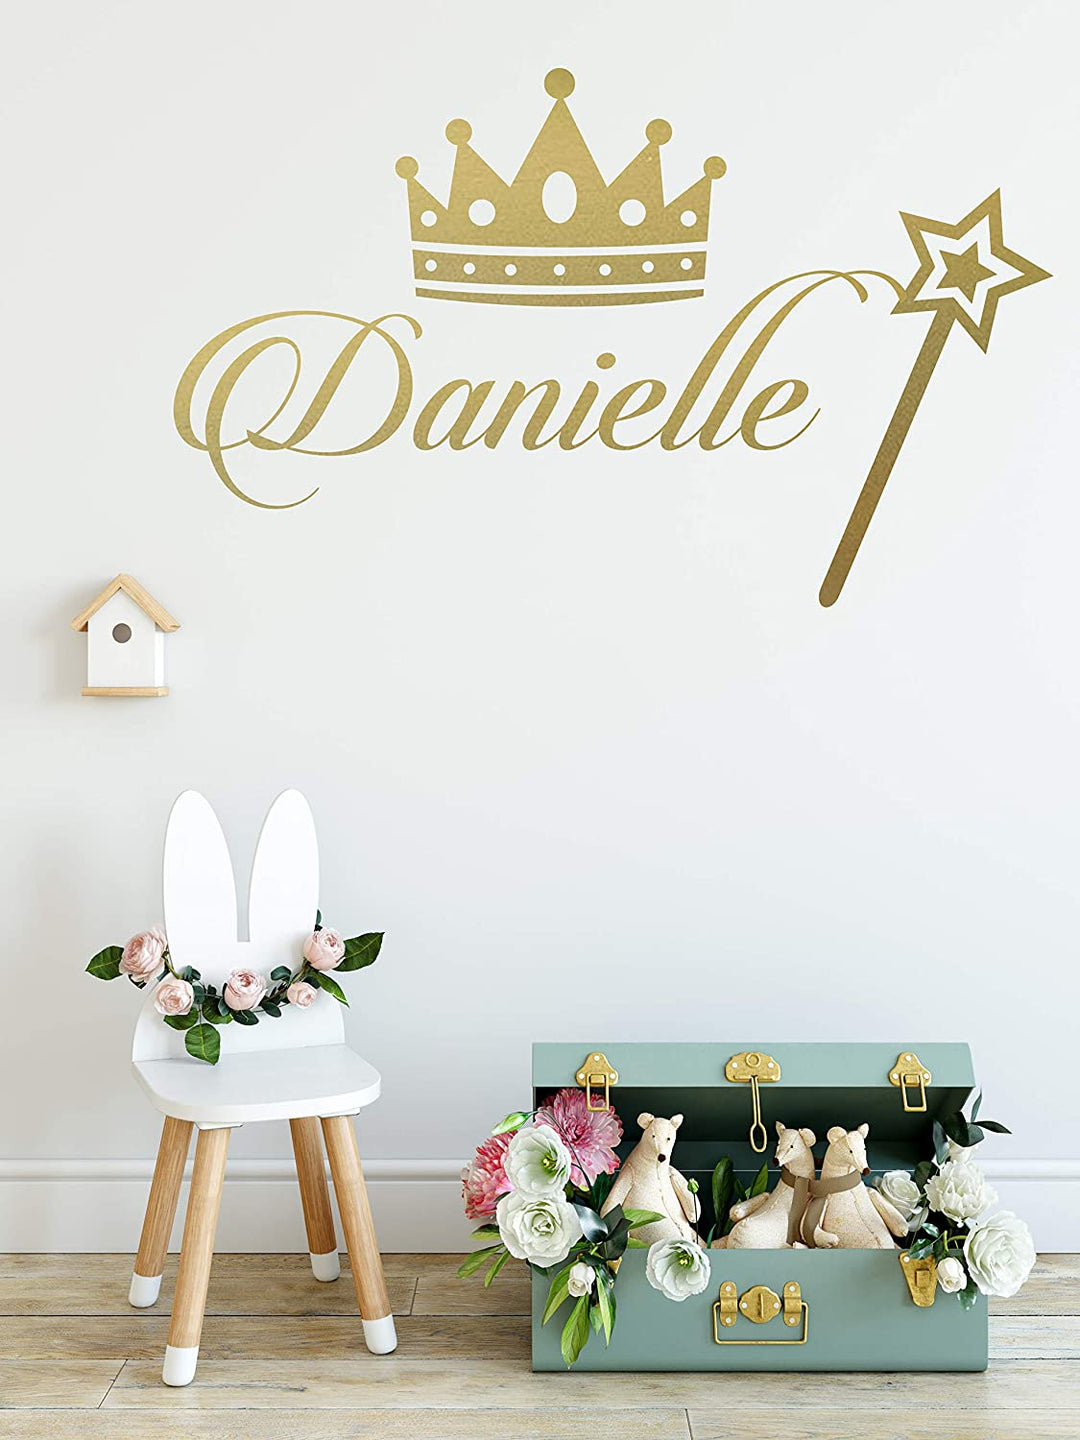 Princess Decor - Personalized Name Princess Wall Decal - Nursery Baby Girl Decoration - Mural Wall Decal Sticker for Home Interior Decoration (M382) - egraphicstore